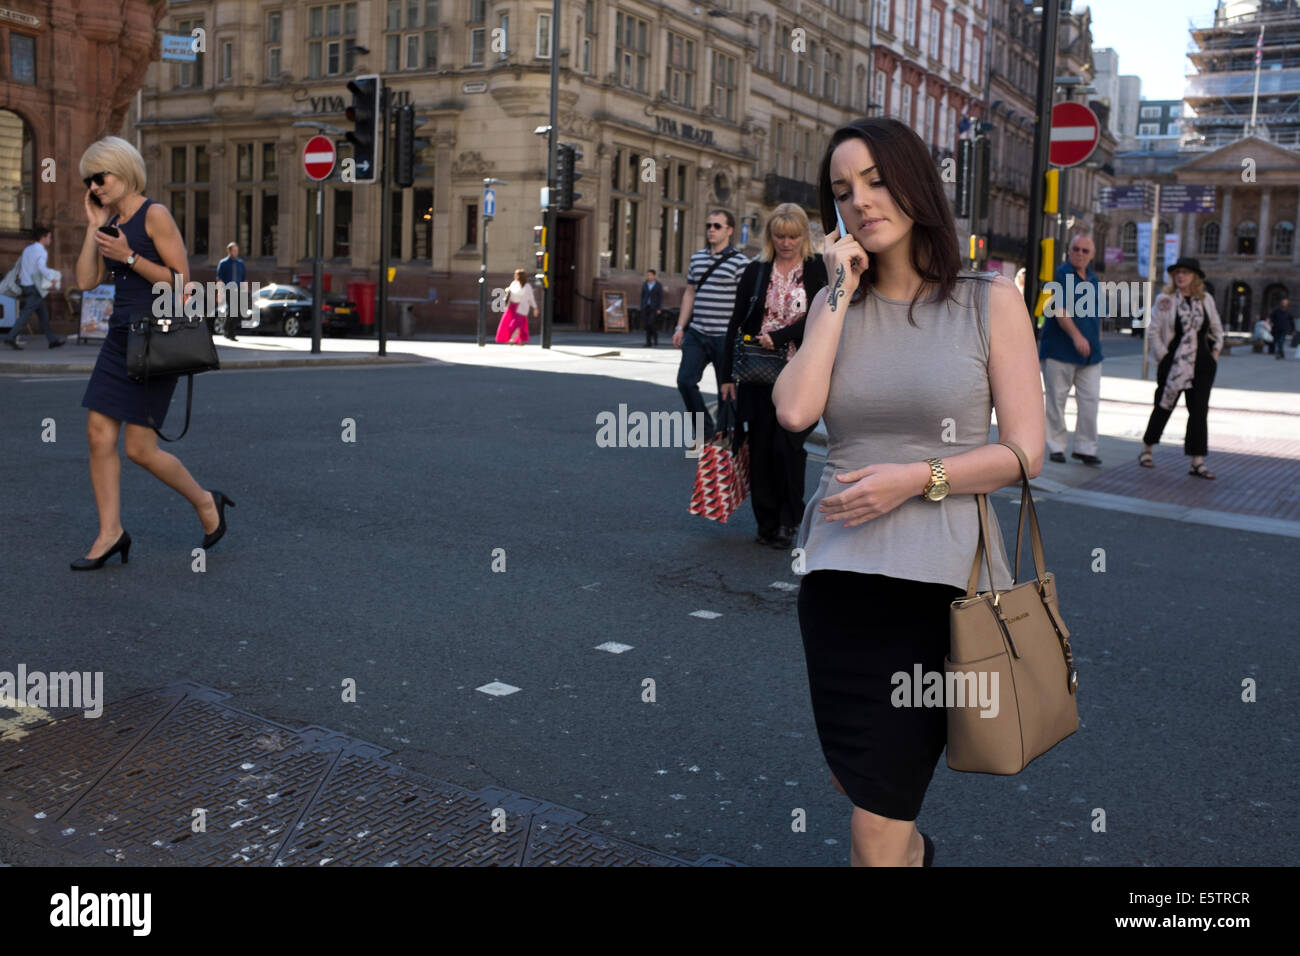 Business woman on phone crossing road business area Stock Photo